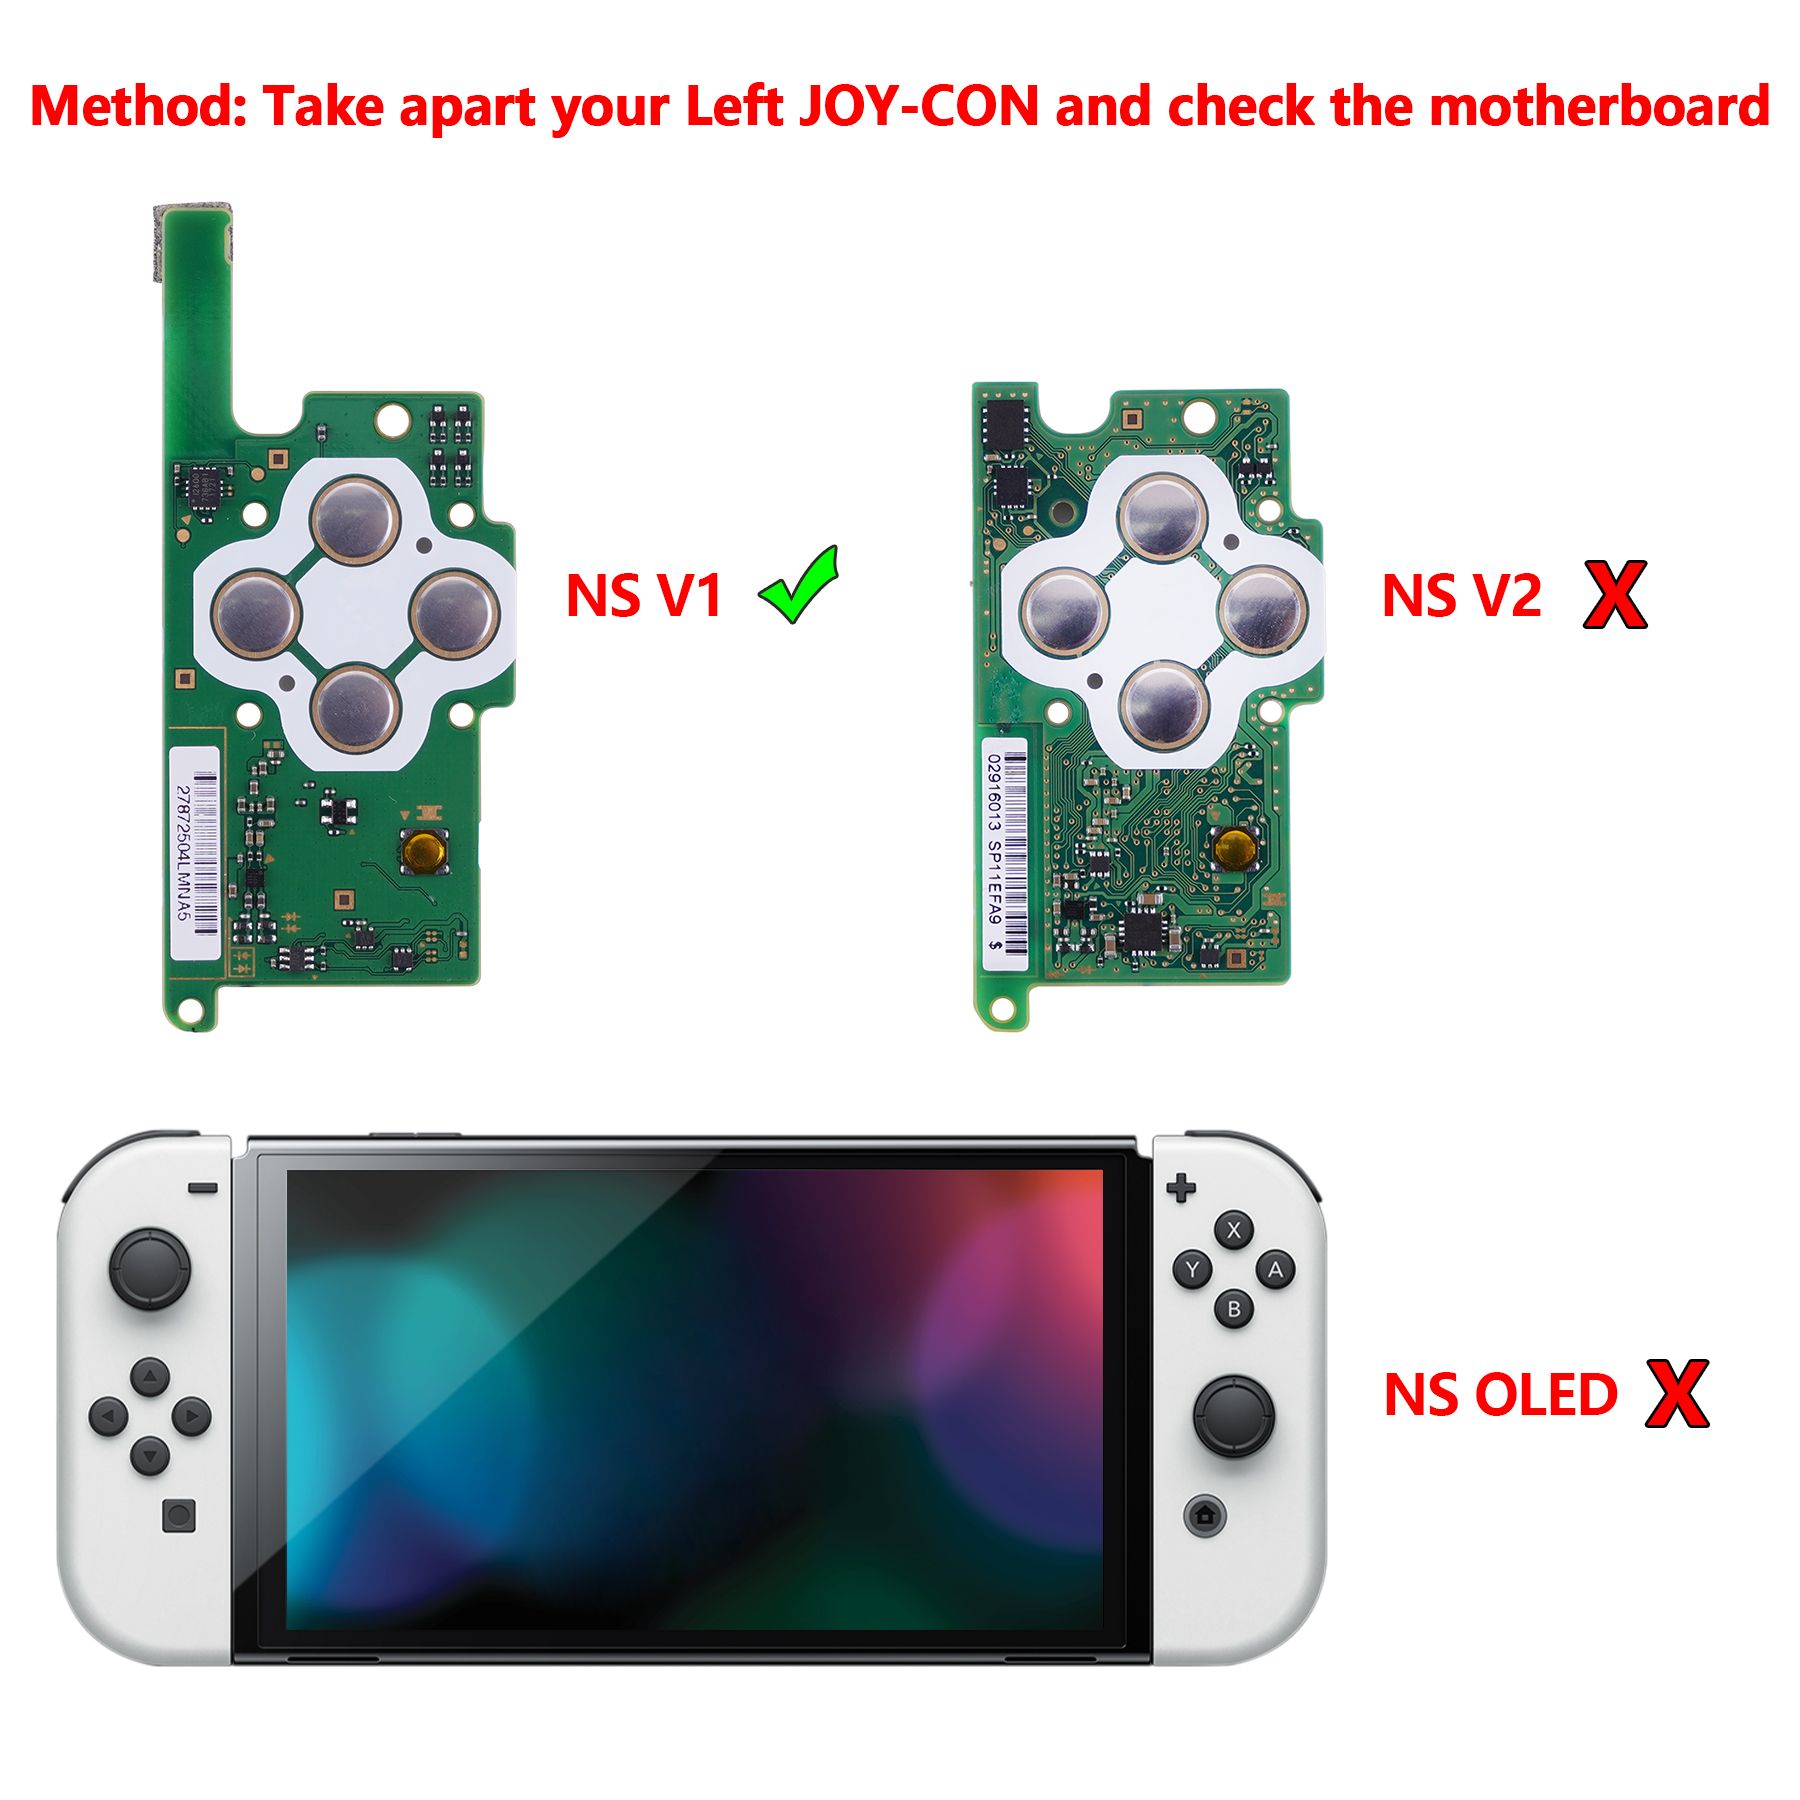 Joy-Con LED Button Kit for Nintendo Switch - Chrome Gold Extremerate